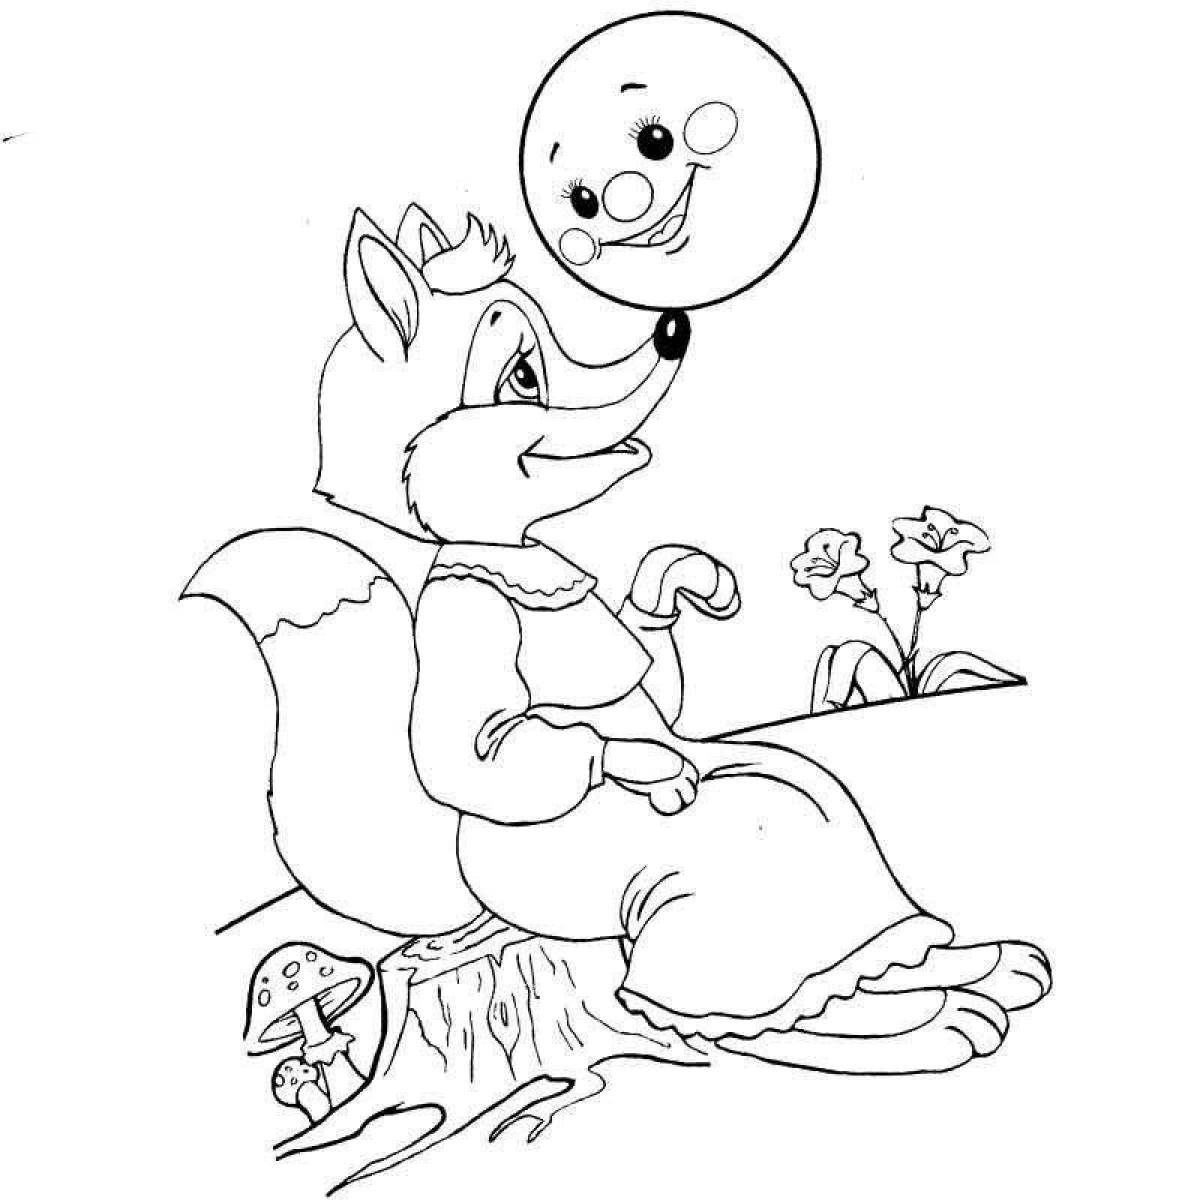 Luminous fox and rabbit coloring page